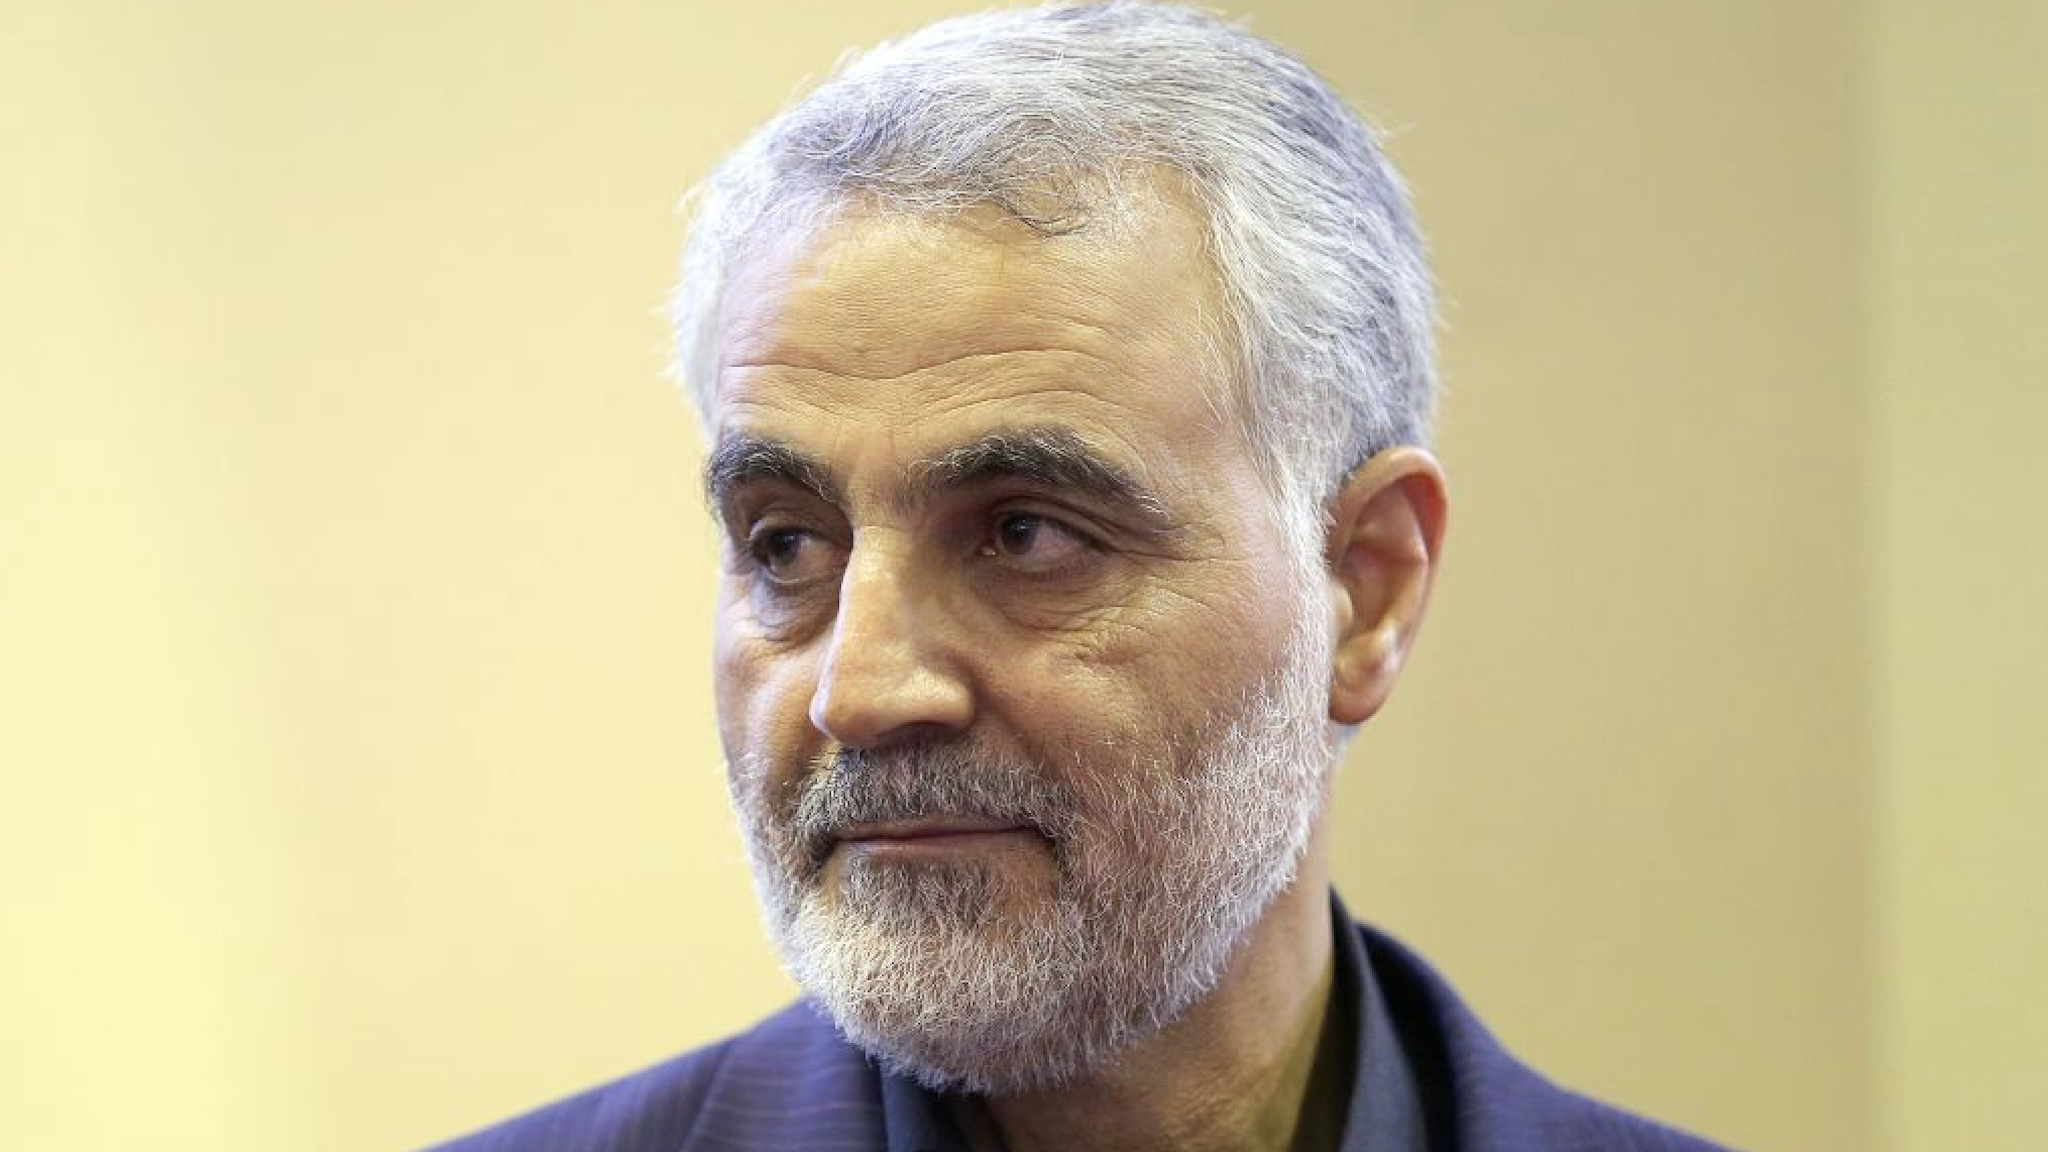 In this picture taken on September 14, 2013, the commander of the Iranian Revolutionary Guard's Quds Force, Gen. Qassem Soleimani, is seen as people pay their condolences following the death of his mother in Tehran.